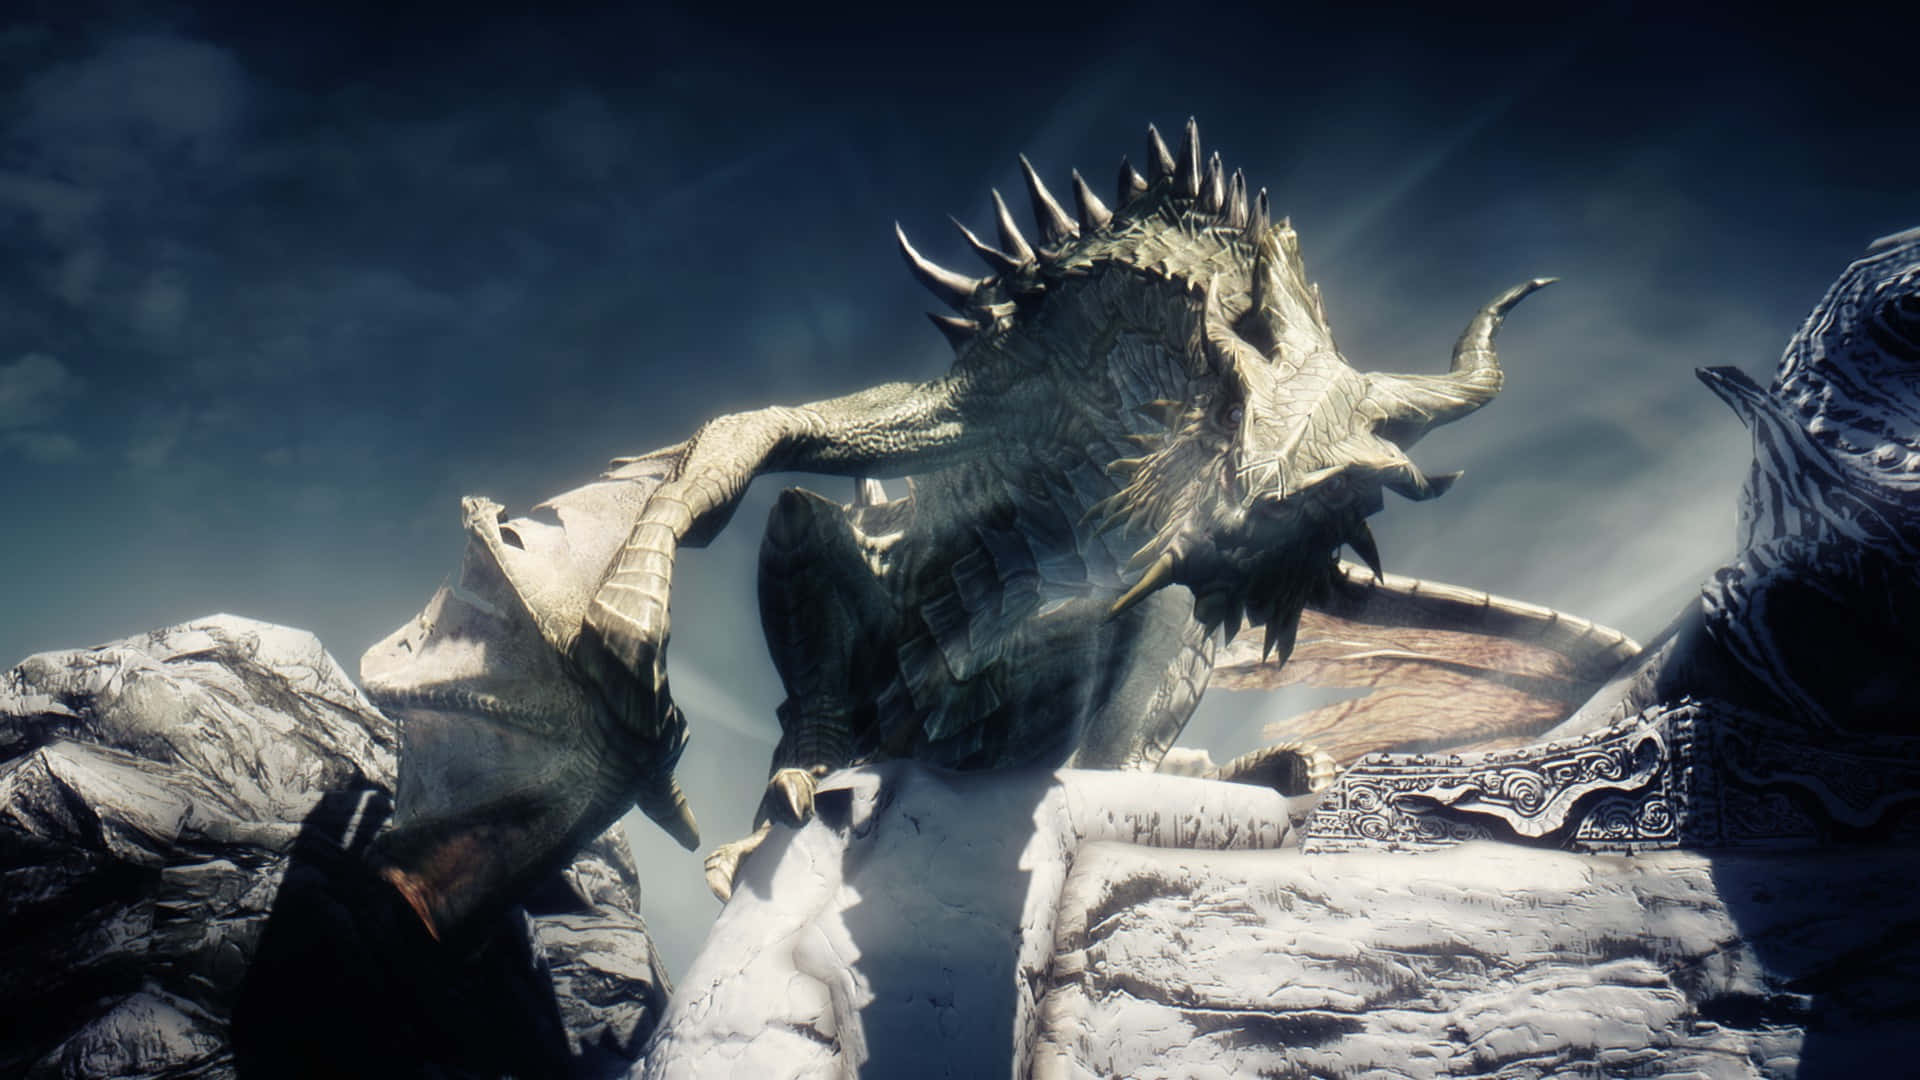 Paarthurnax perched atop the Throat of the World in Skyrim Wallpaper